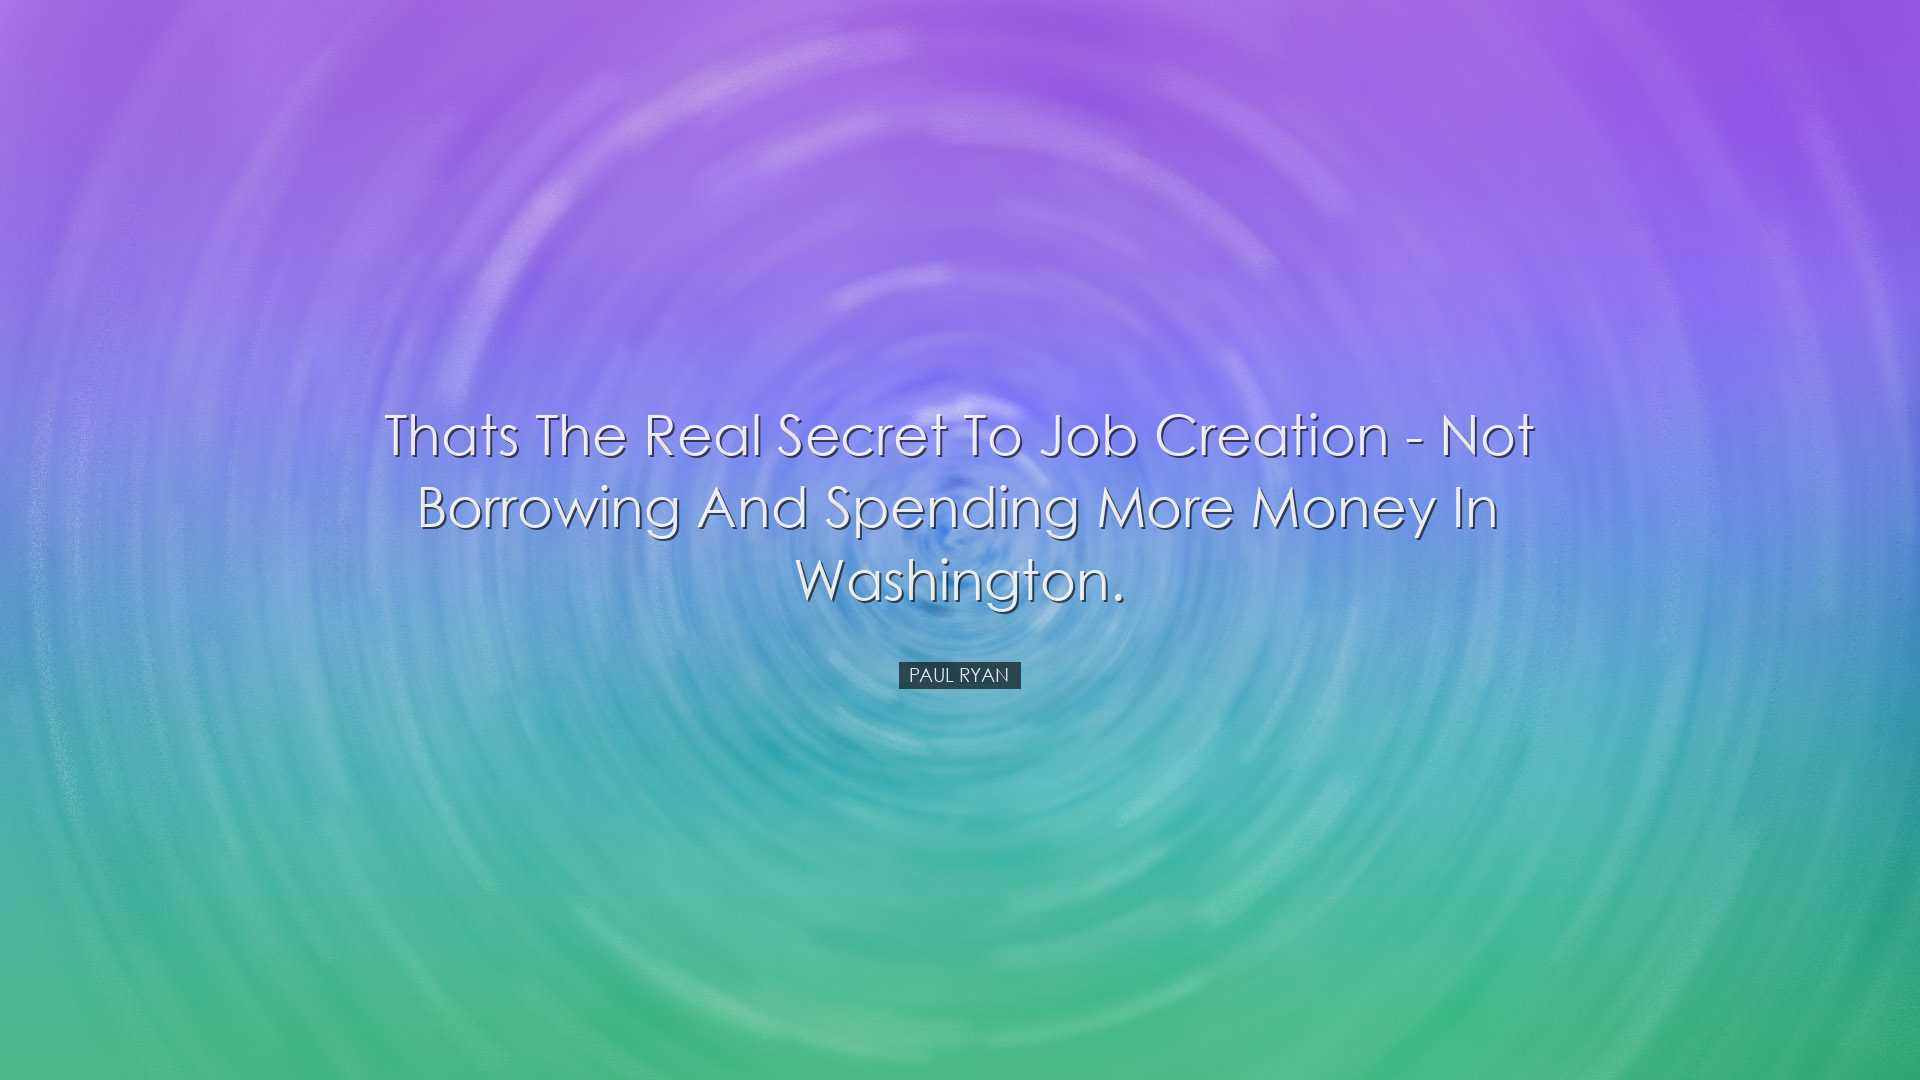 Thats the real secret to job creation - not borrowing and spending